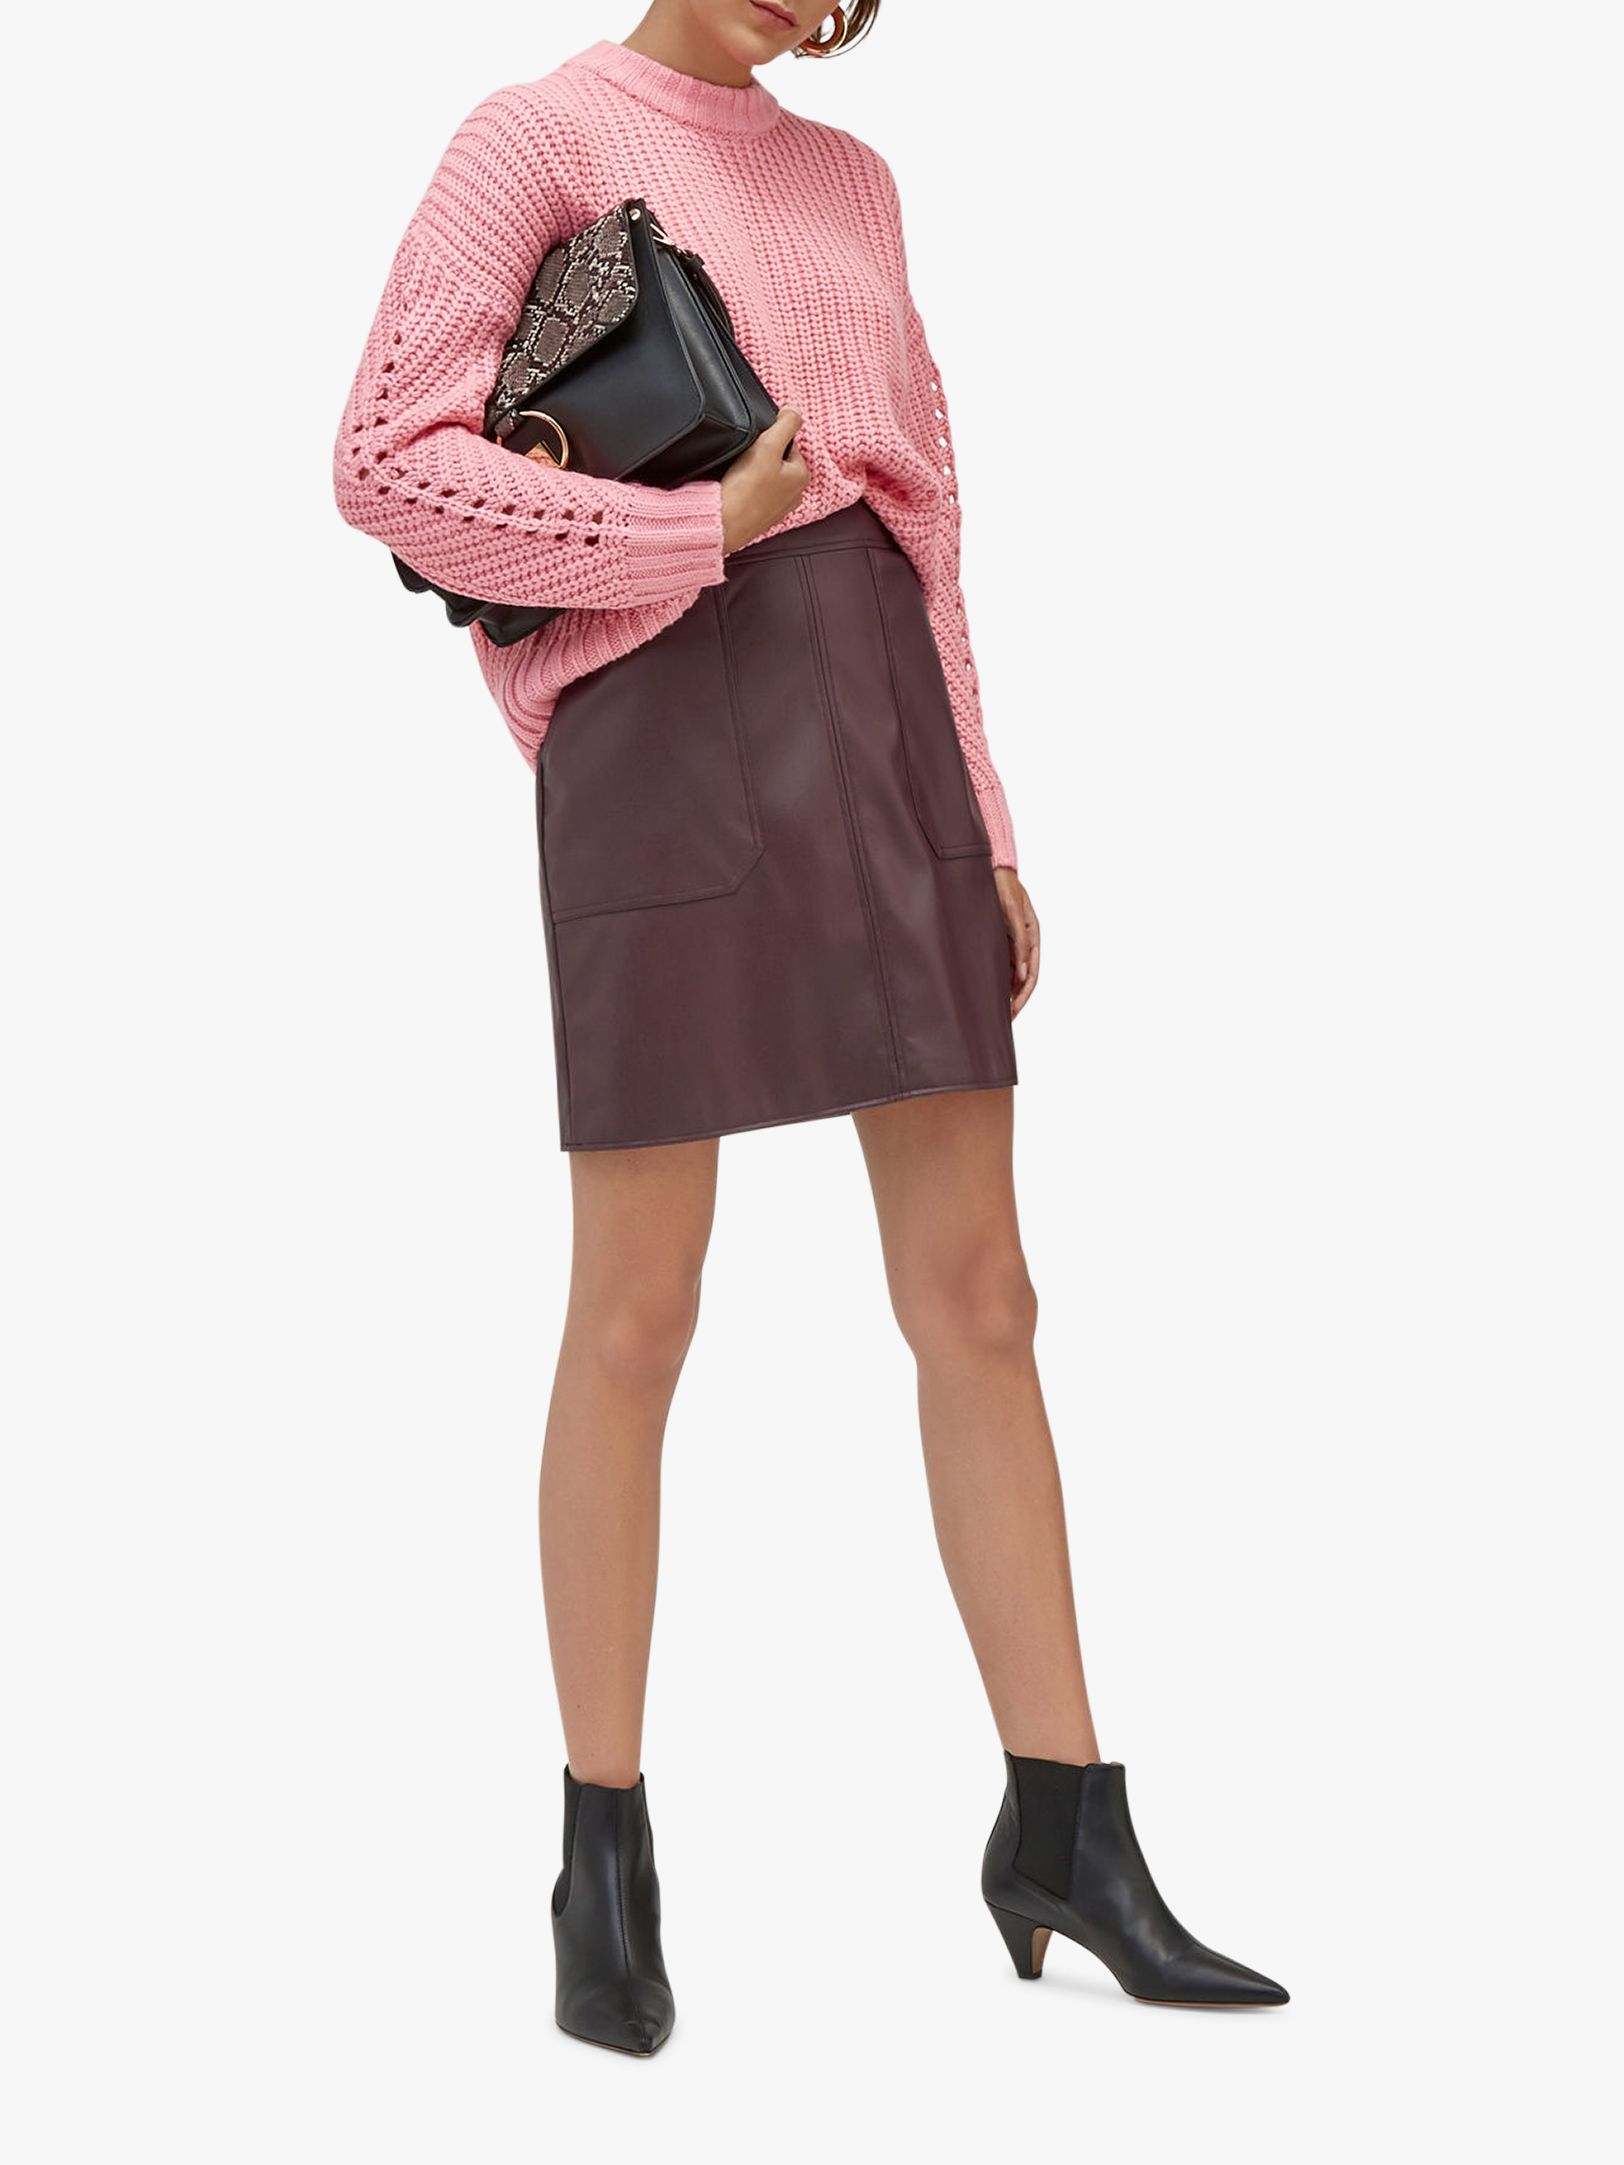 BuyWarehouse Pocket Detail Faux Leather Skirt, Berry, 6 Online at johnlewis.com